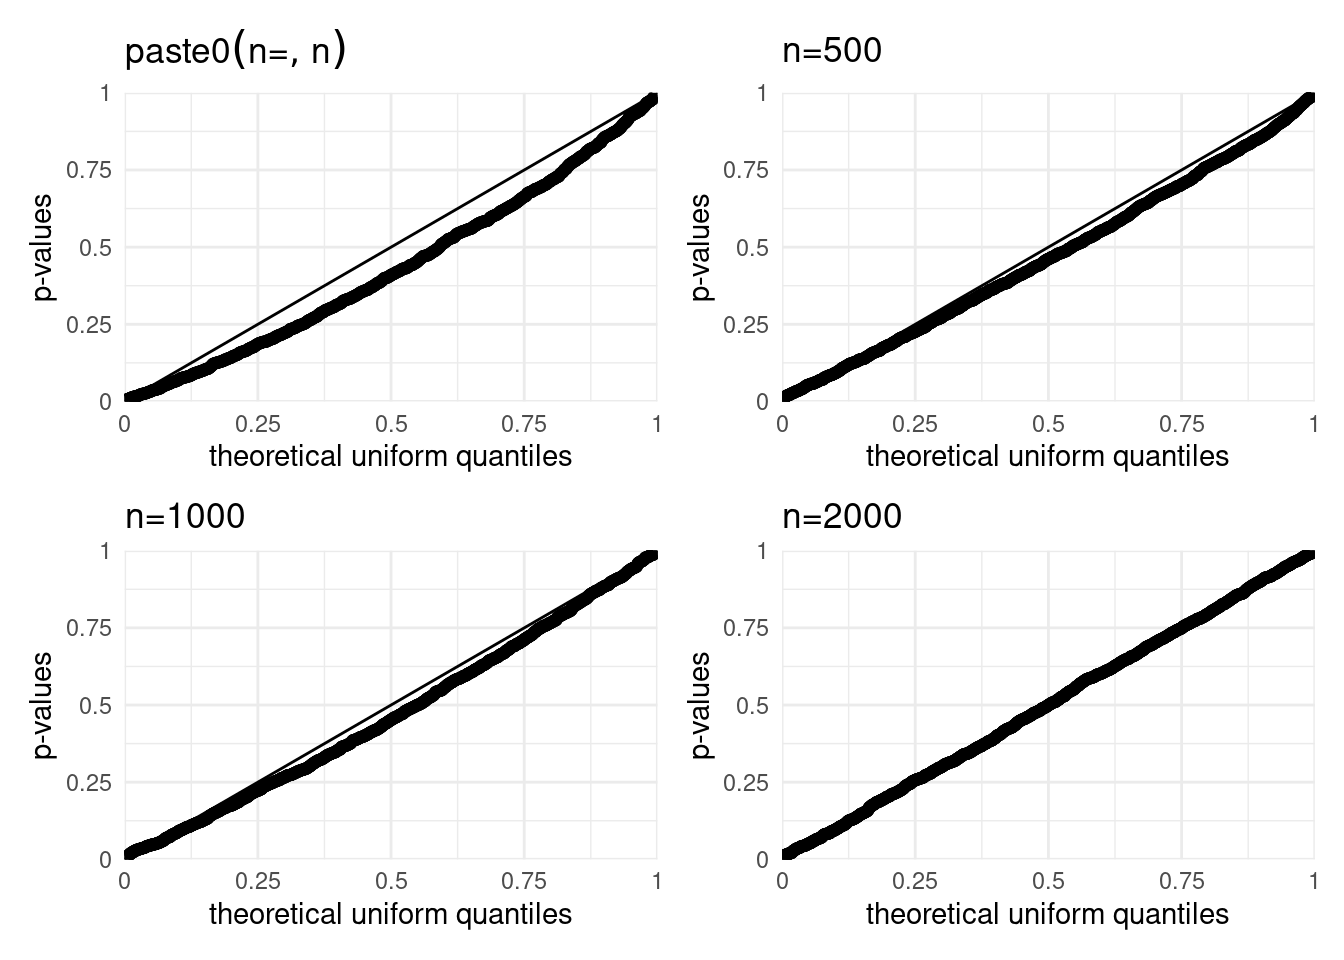 Simulated null distribution of the likelihood ratio test comparing the Poisson and negative binomial regression models. The quantile-quantile plot show the distribution of positive statistics for sizes $n=100, 500, 1000, 2000$ relative to the asymptotic $\frac{1}{2}\chi^2_1$.